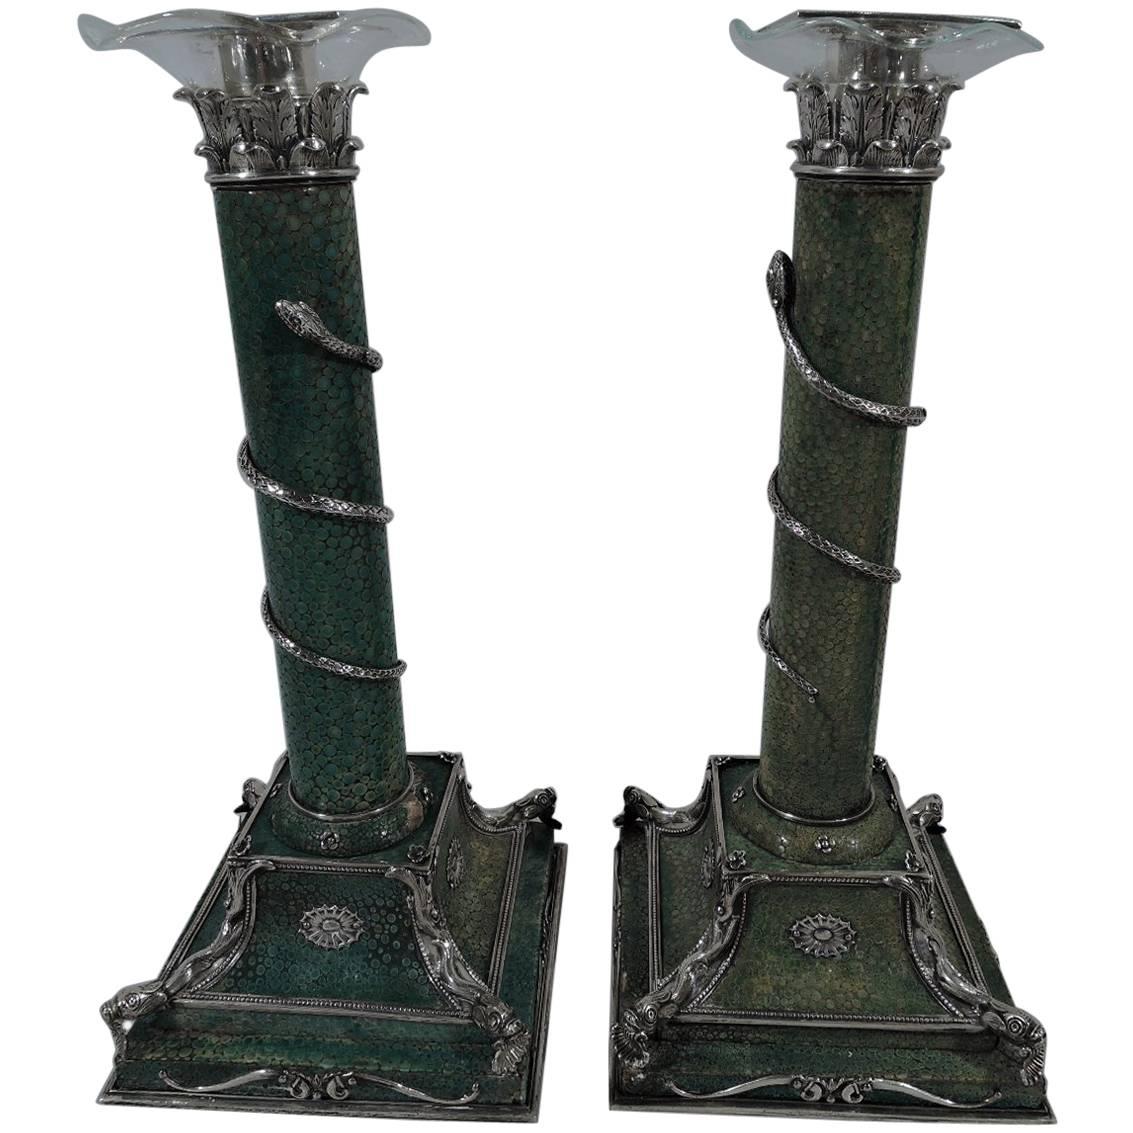 Pair of Antique European Shagreen and Silver Candlesticks